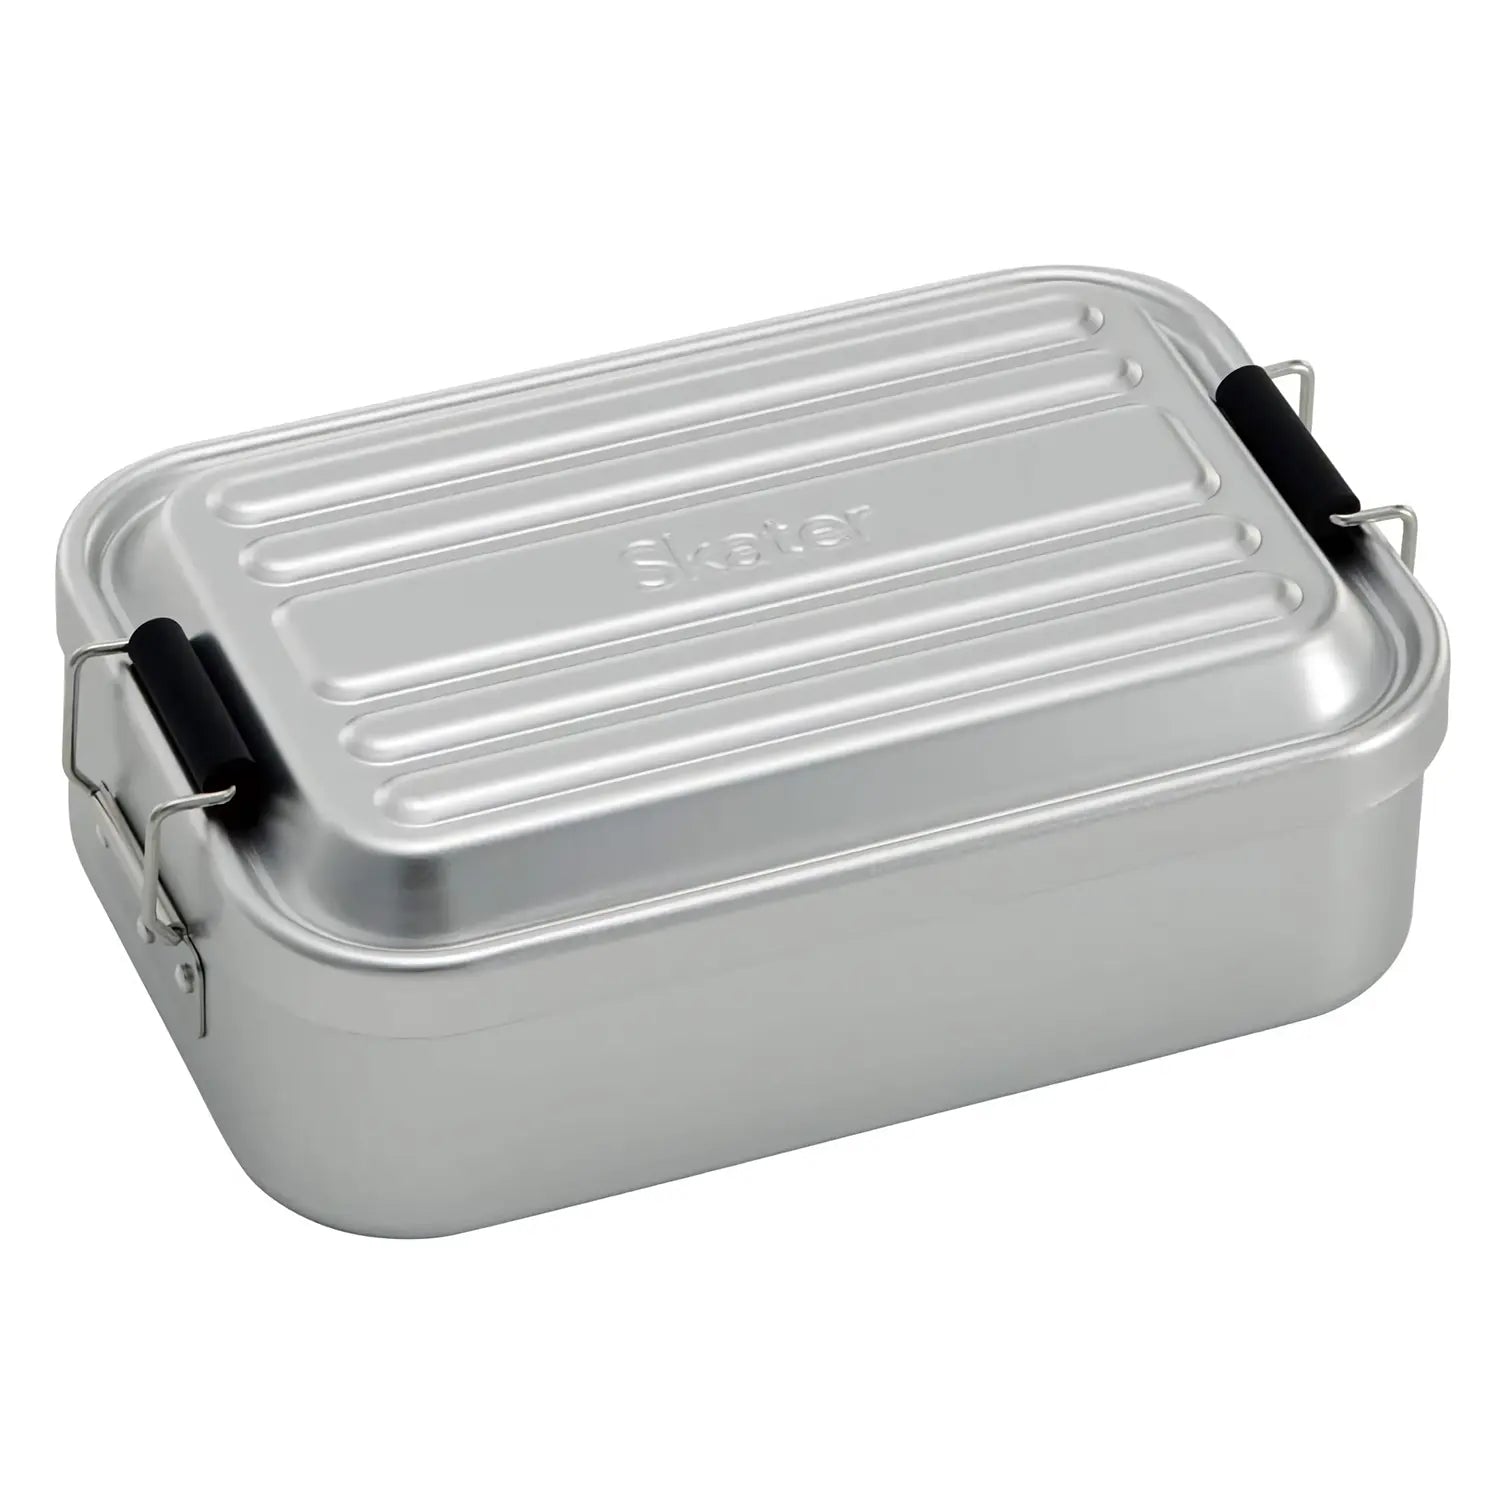 Fukui Craft ABS Resin Deluxe 5-Divided Bento Lunch Box - Globalkitchen Japan